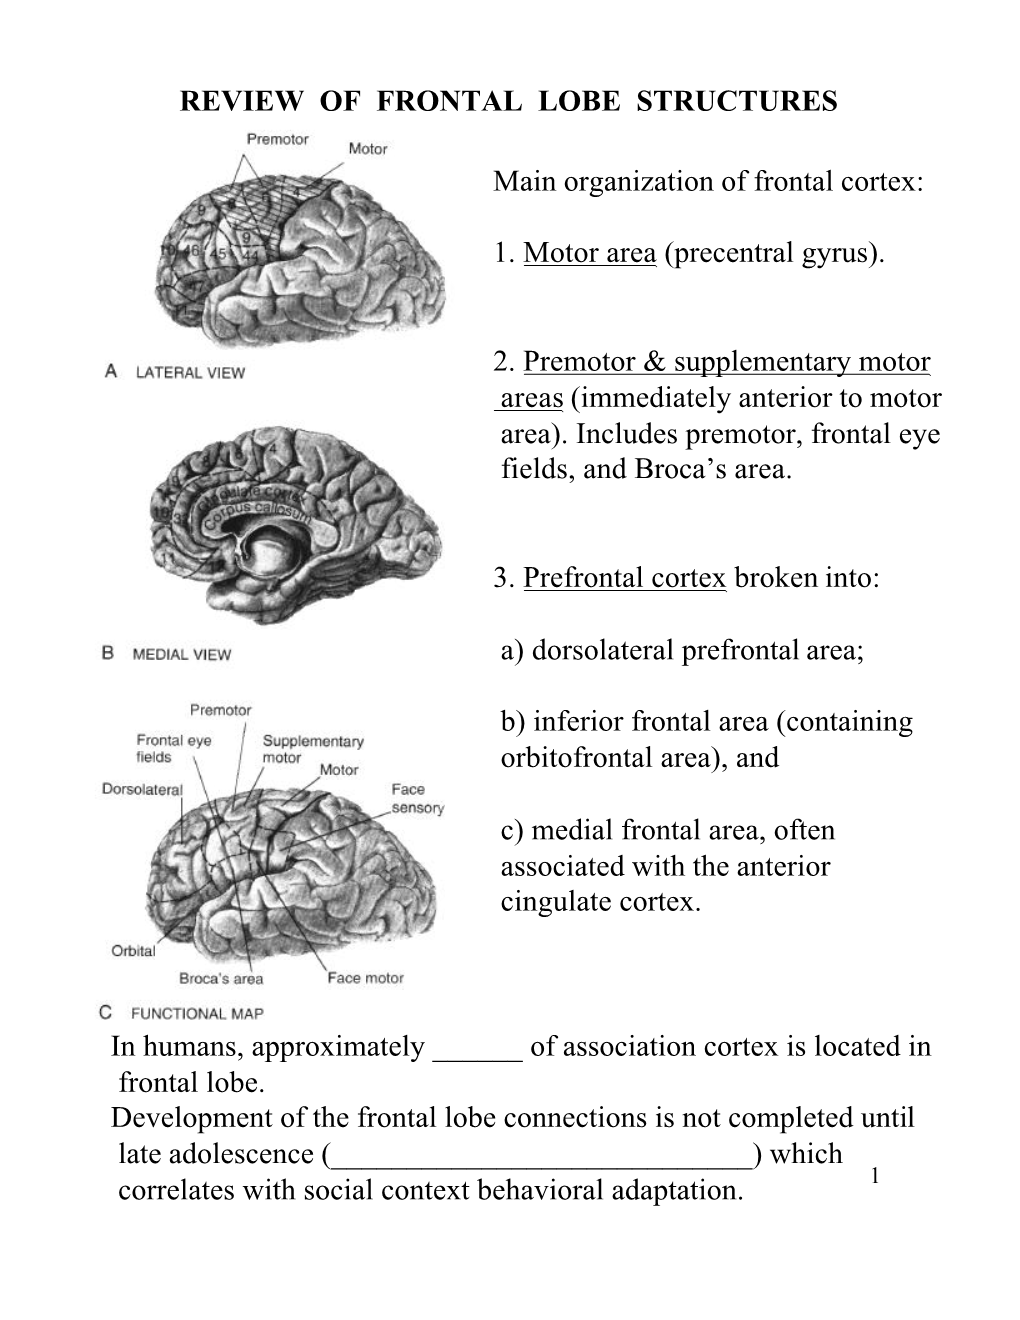 Review of Frontal Lobe Structures